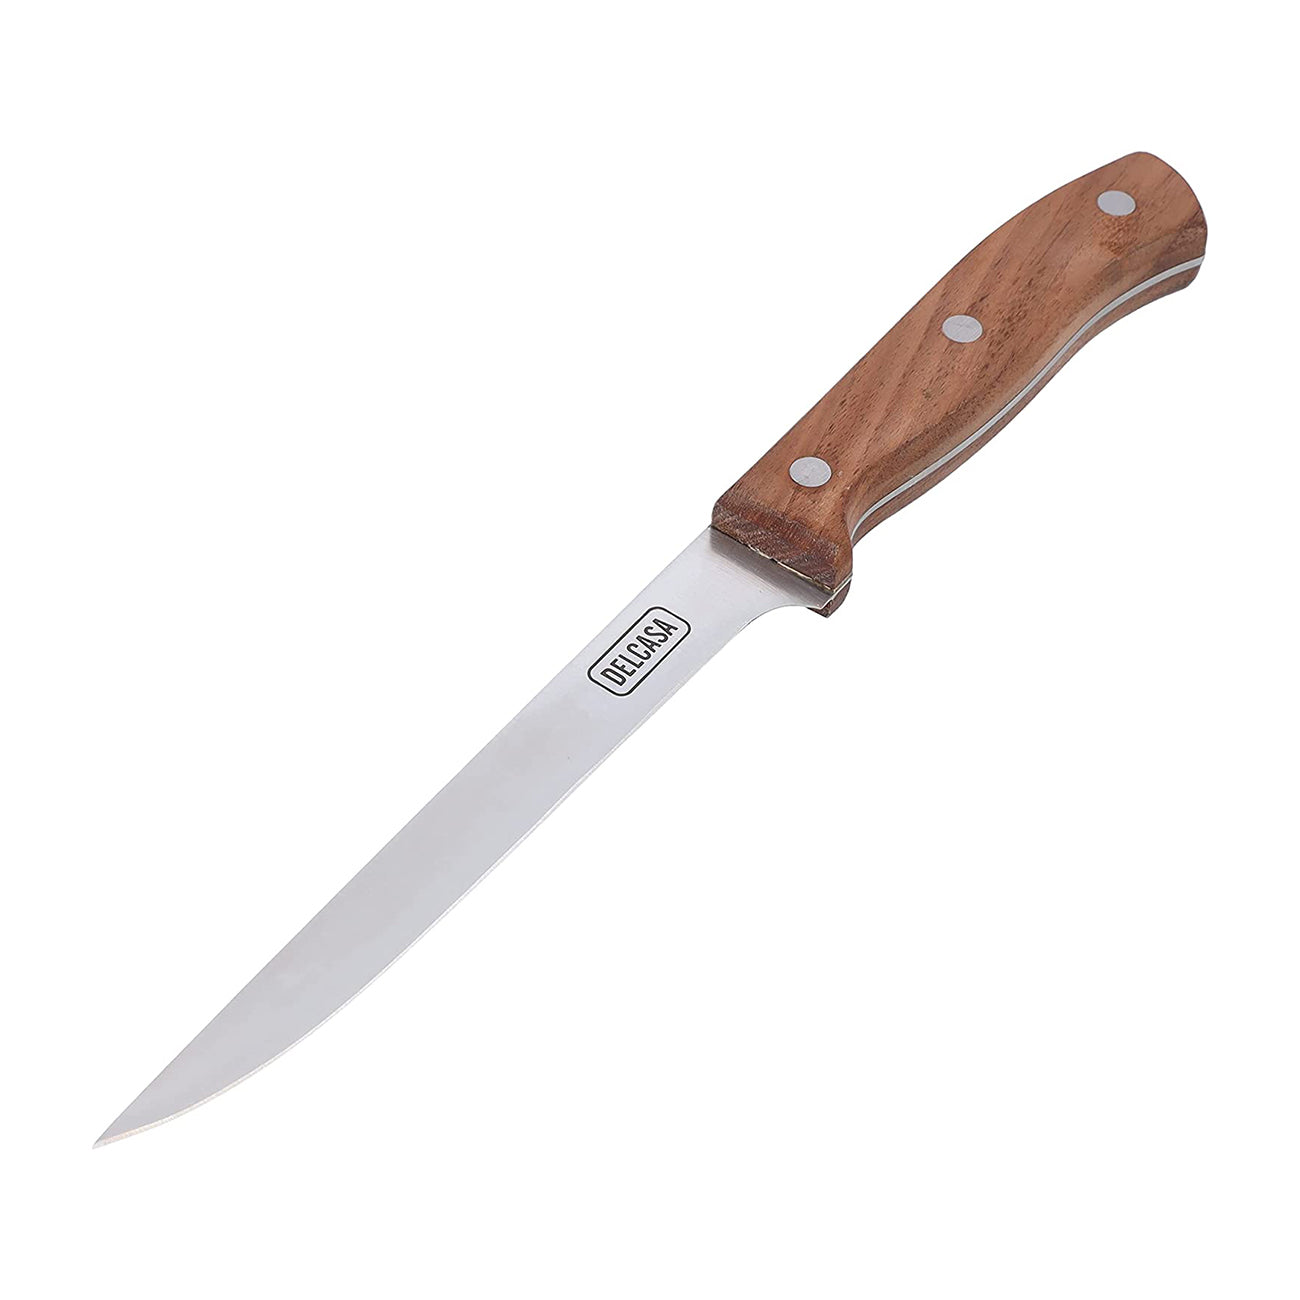 6" Bonning Knife, Stainless Steel, Dc2073 | Walnut Wood Handle | Sharp Blade | RUSt-Resistant | Durable & Strong | Knife For Cutting Vegetables, Meat, Fruits & More